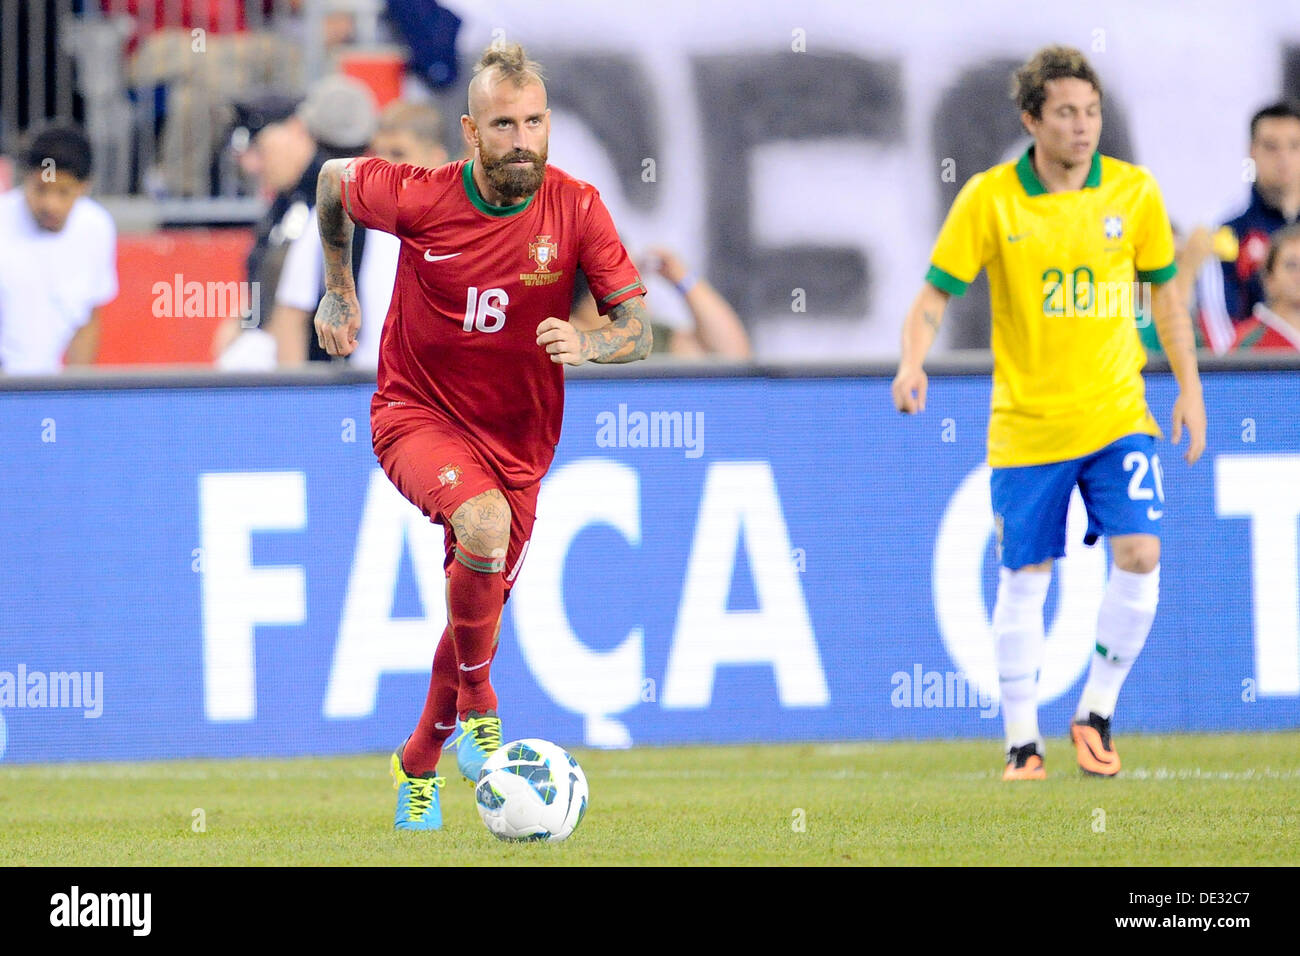 Foxborough, Massachusetts, USA. 10th Sep, 2013. September 10 , 2013 - Foxborough, Massachusetts, U.S. - Portugal's Raul Meireles (16) advances the ball during the FIFA friendly match between Brazil and Portugal held at Gillette Stadium in Foxborough Massachusetts. Final score Brazil 3 Portugal 1 Eric Canha/CSM. Credit:  csm/Alamy Live News Stock Photo